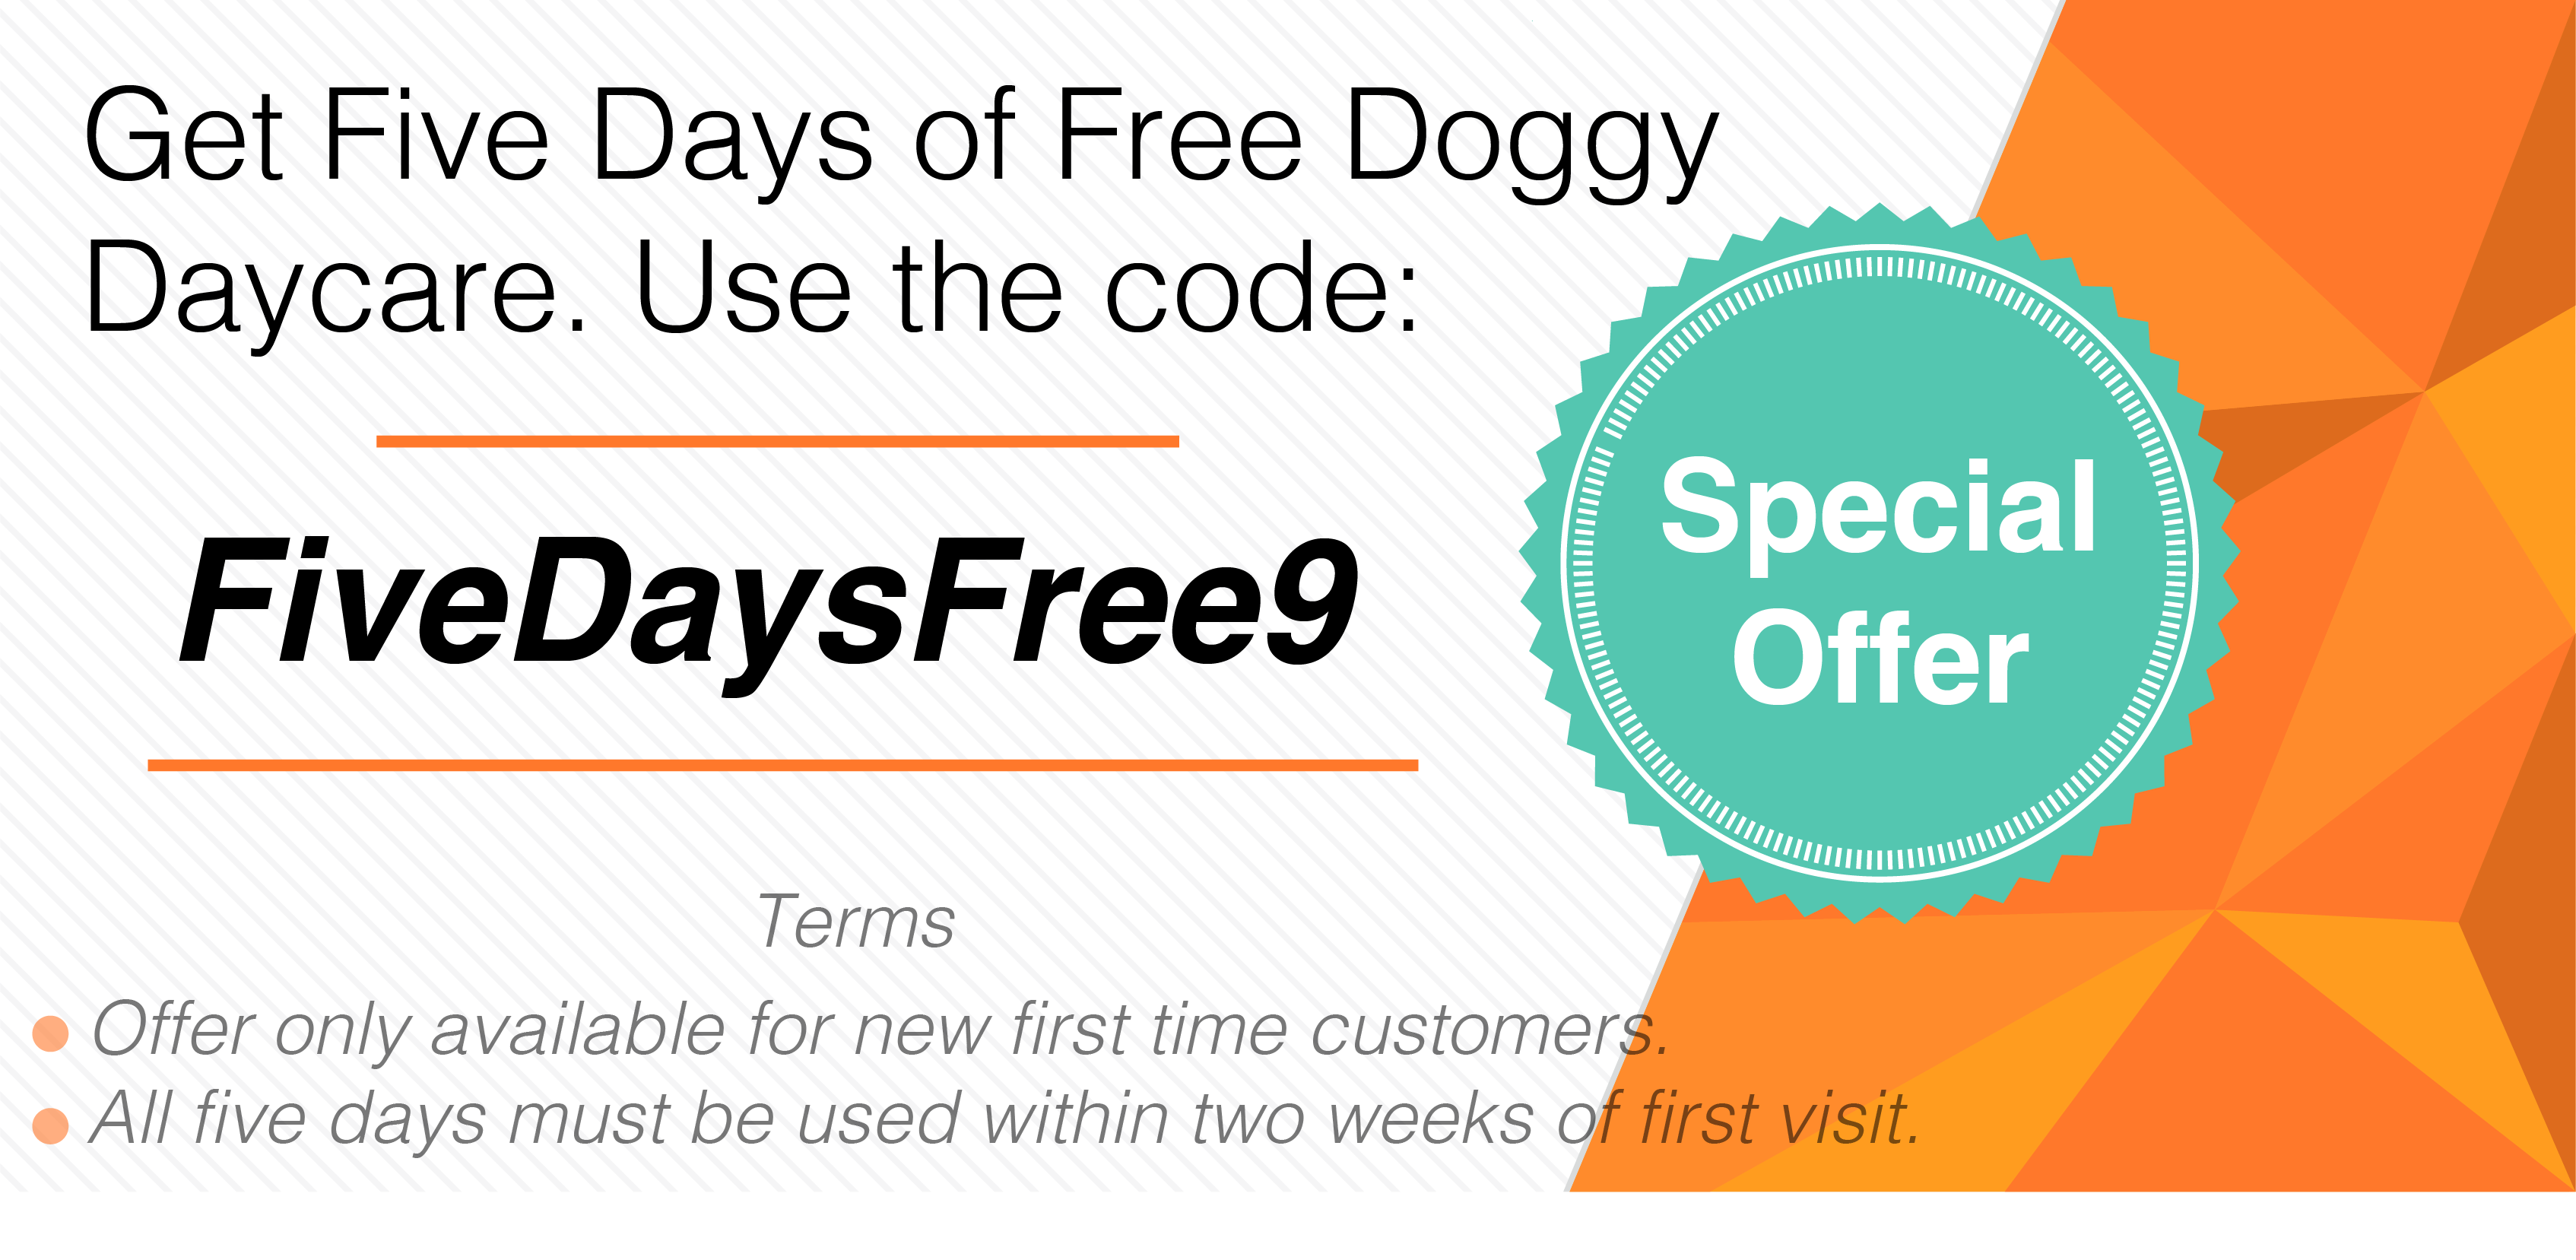 Coupon for Five Free Days of Doggy Daycare. Coupon code is FiveDaysFree9